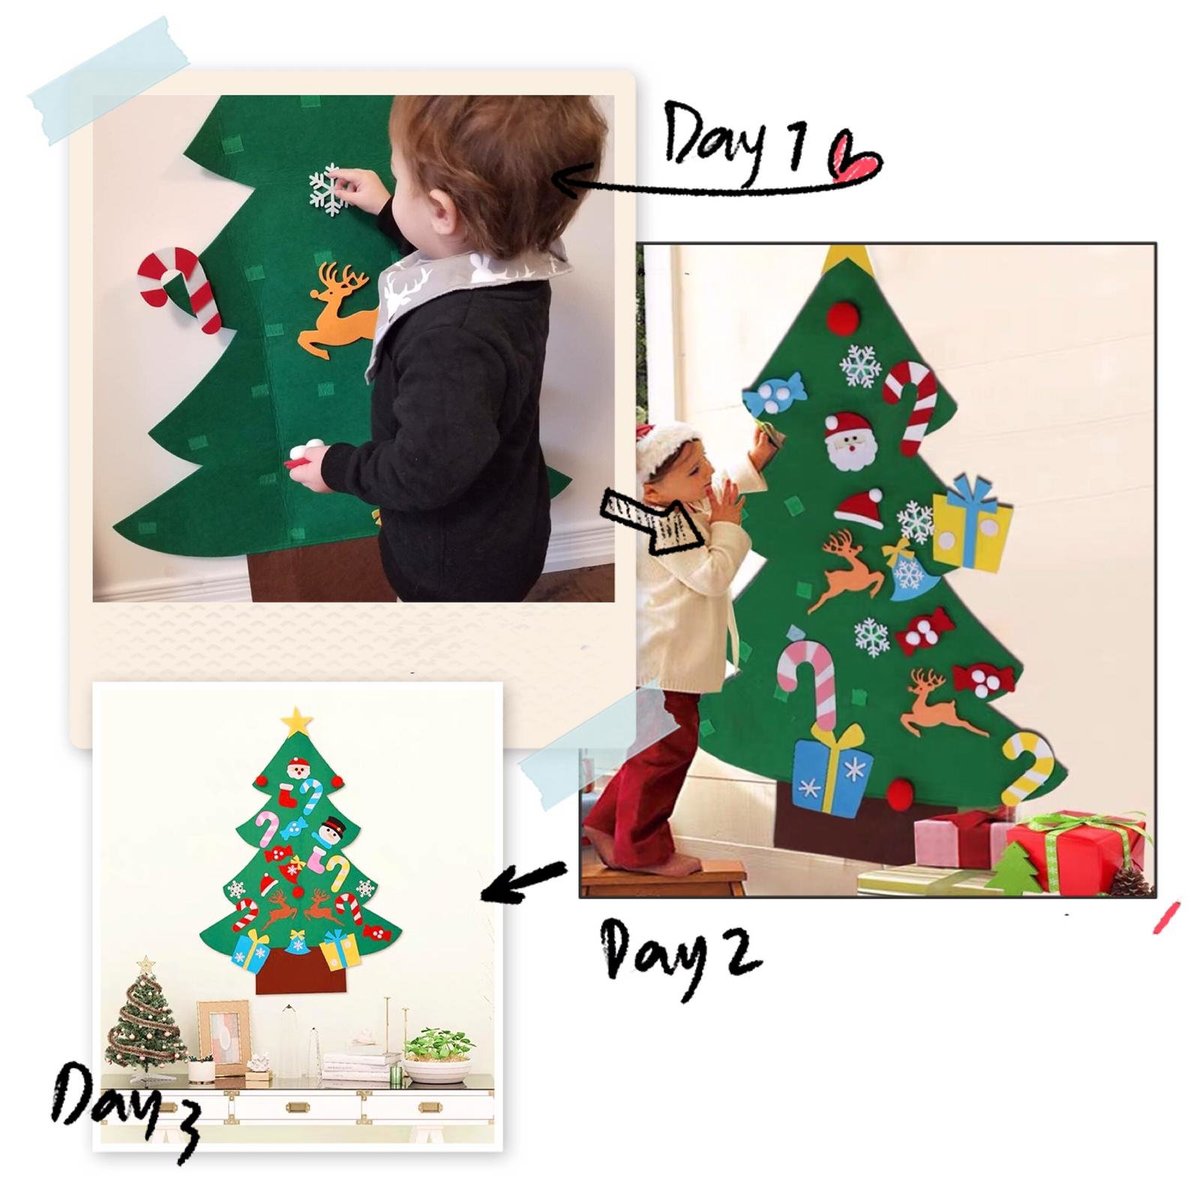 DIY Wall Mounted Christmas Tree Decoration 1 set contains Tree, Accessory bag